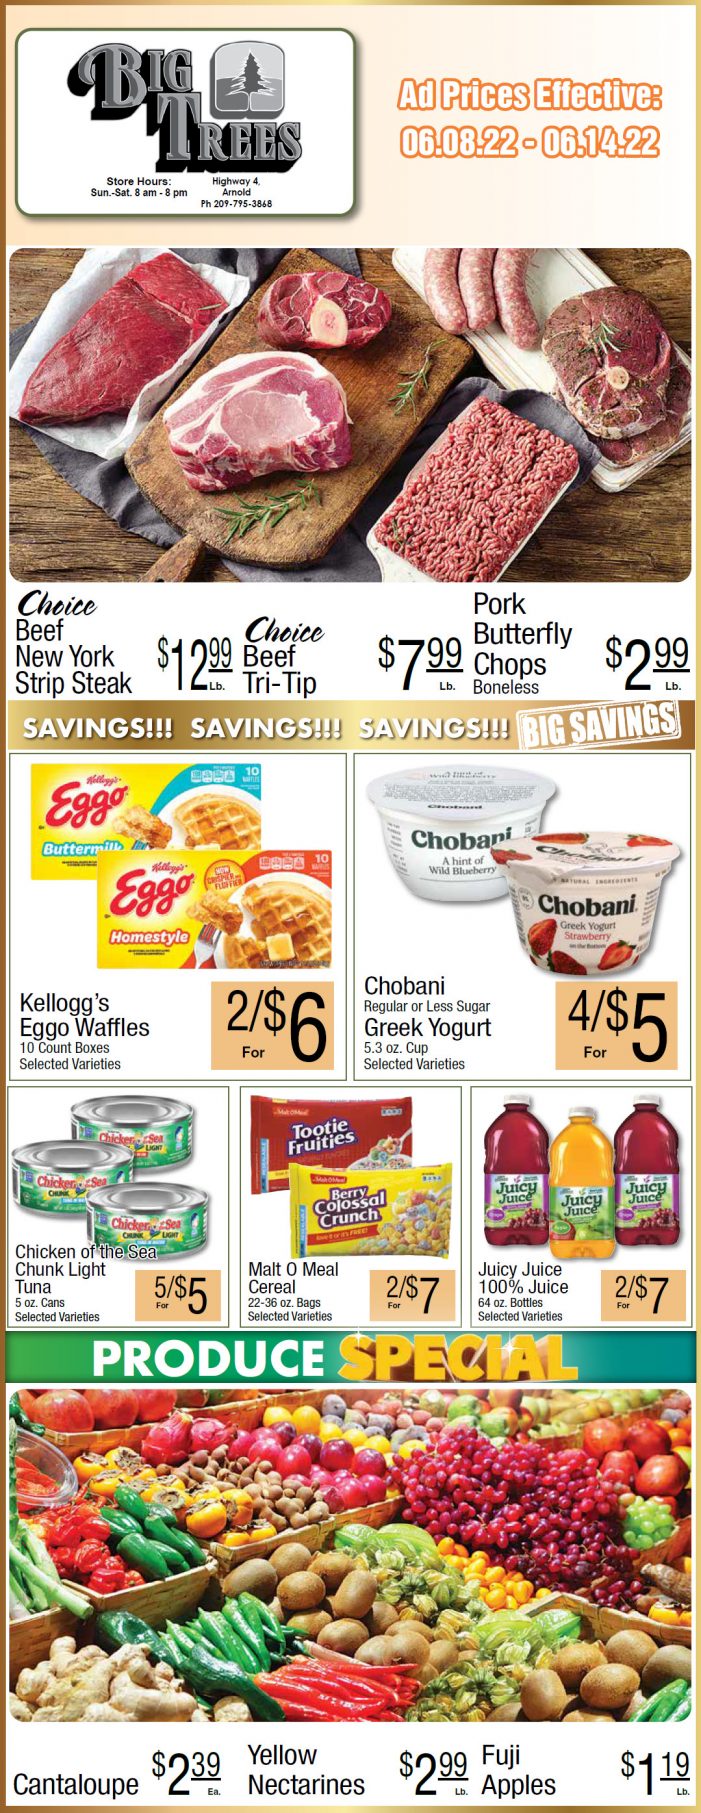 Big Trees Market Weekly Ad & Grocery Specials June 8 – 14!  Shop Local & Save!